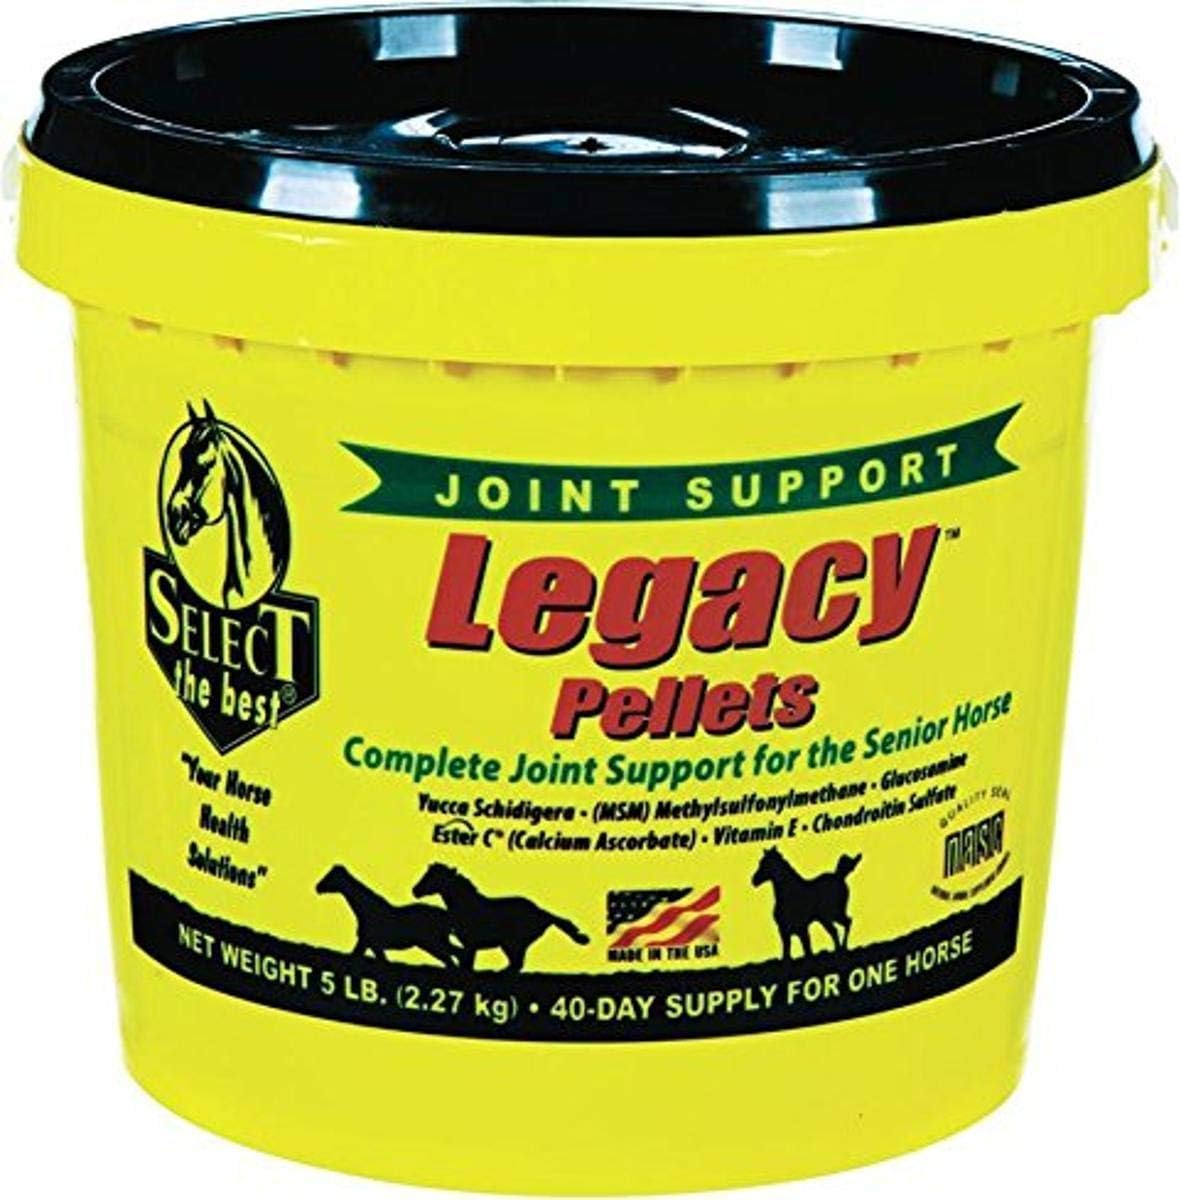 RICHDEL 784299540507 Legacy Pellets Joint Support for S